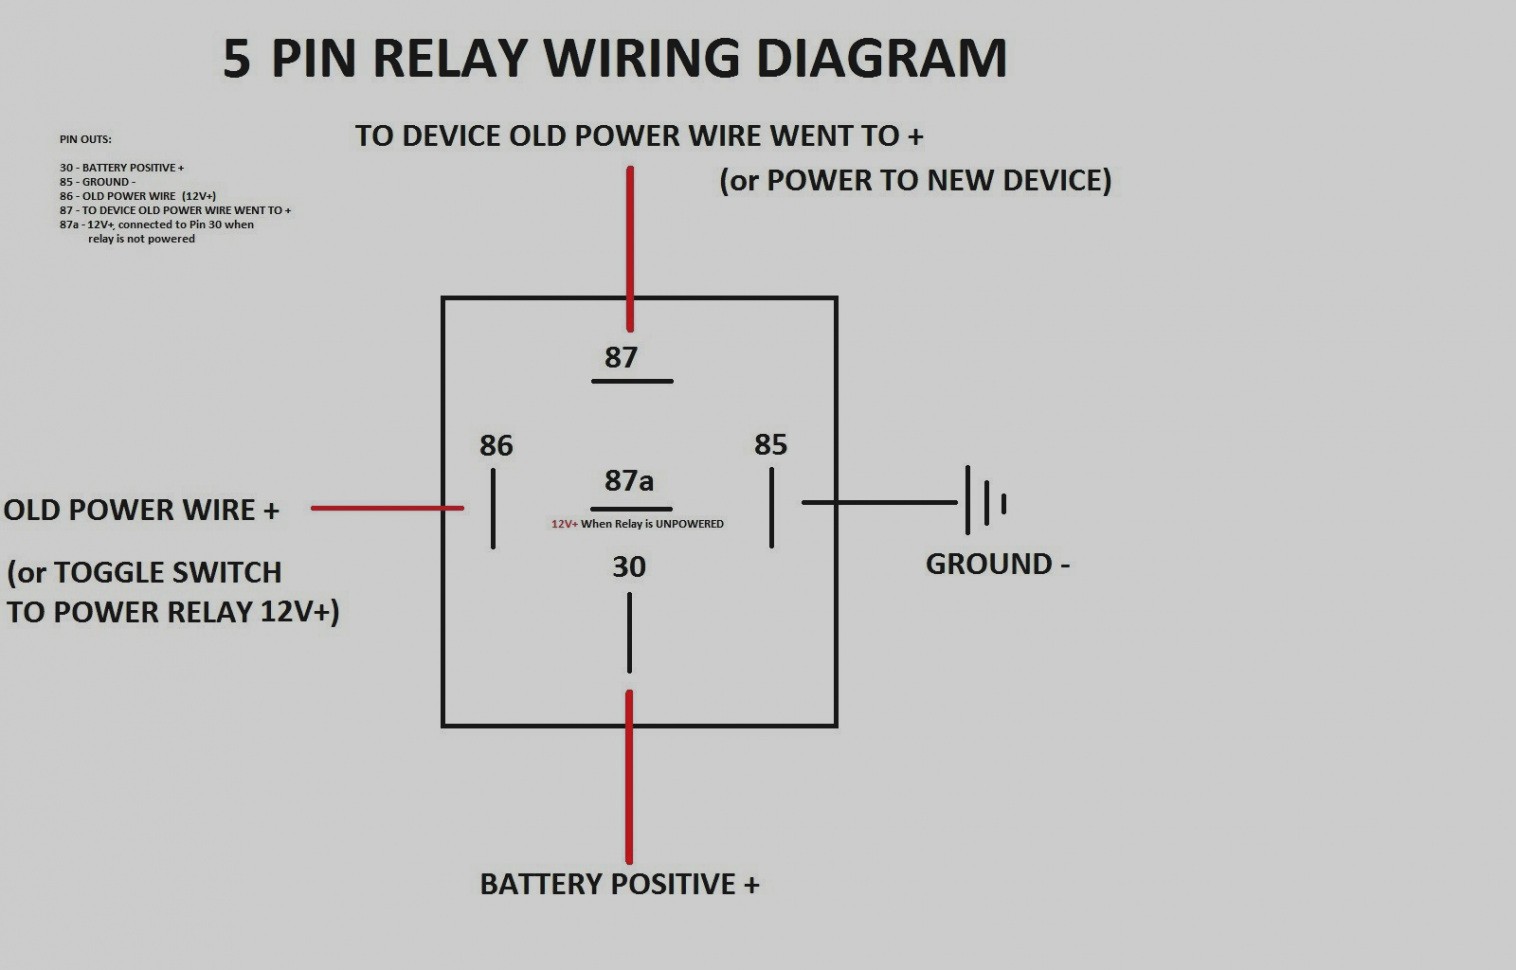 Awesome 12v Changeover Relay Wiring Diagram 12V 5 Pin Deltagenerali Me